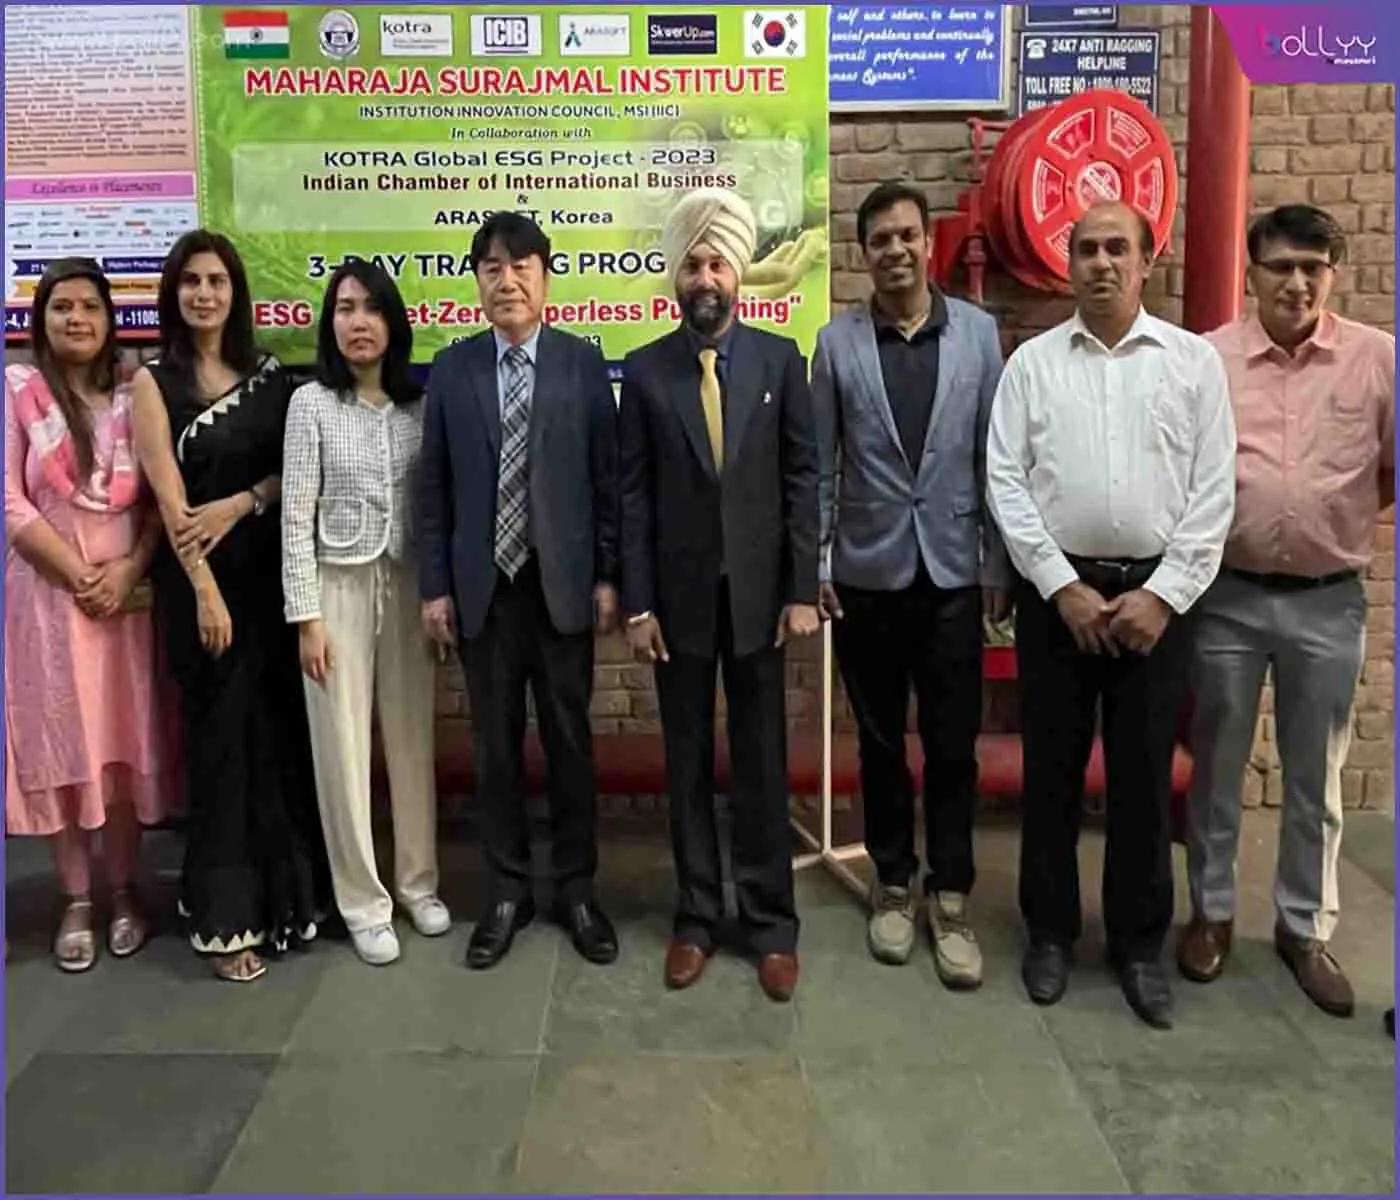 Picture 2 - Dr. In Pyo Hwang, Director, Arasoft, and Chief of the Institute of Global Competency Development (IGCD), Seoul, and his assistant NG Yong XIN at Maharaja Surajmal Institute in Janakpuri, Delhi, on Tuesday